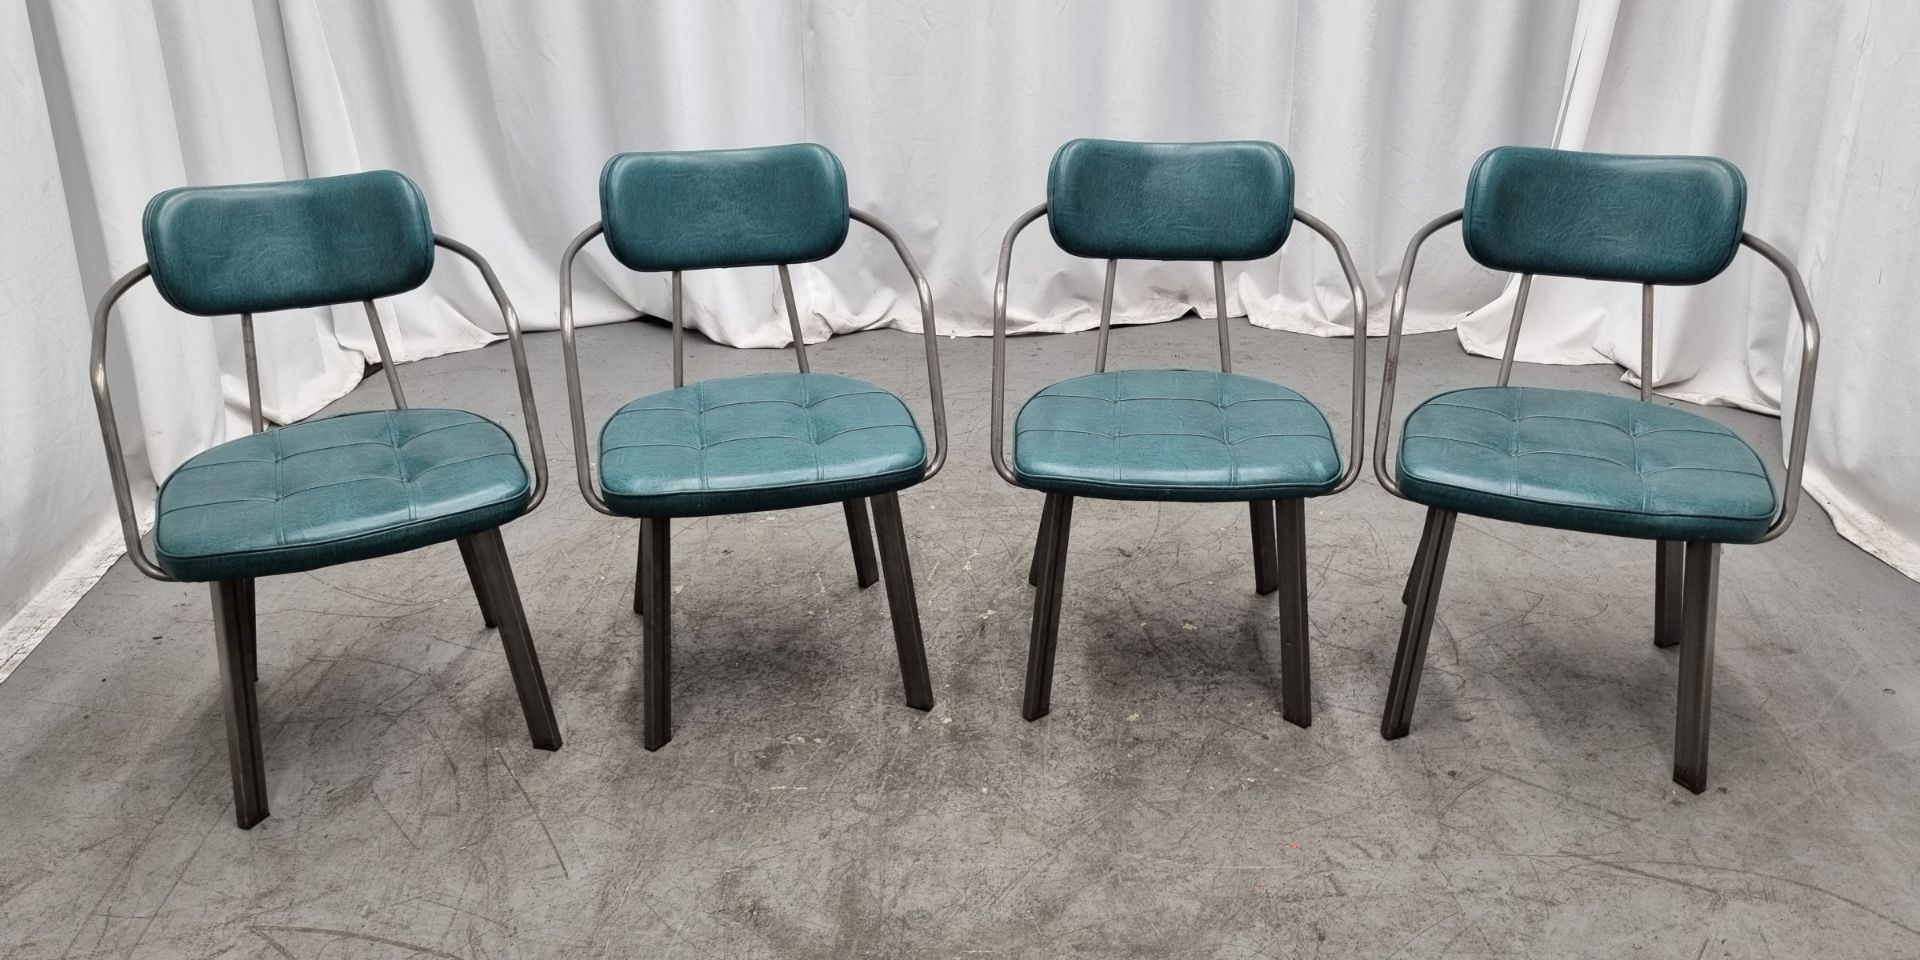 4x Industrial green leather restaurant chairs - L 550 x W 600 x H 80cm